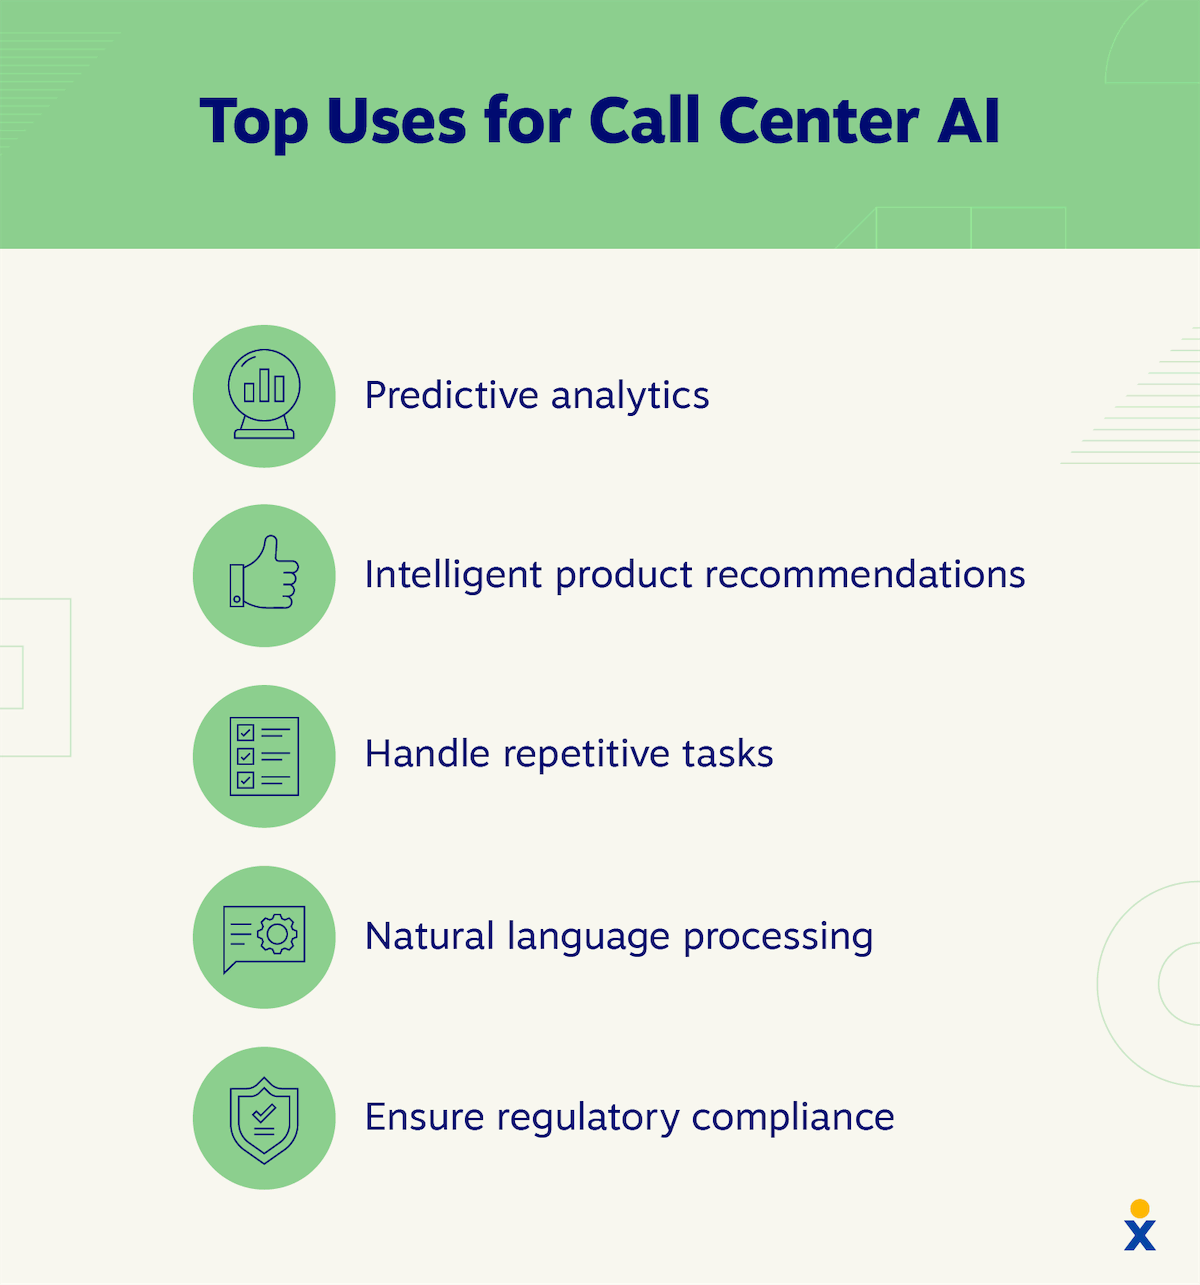 Top uses for AI call centers: Predictive analytics, intelligent product recs, repetitive tasks, natural language processing, regulatory compliance.